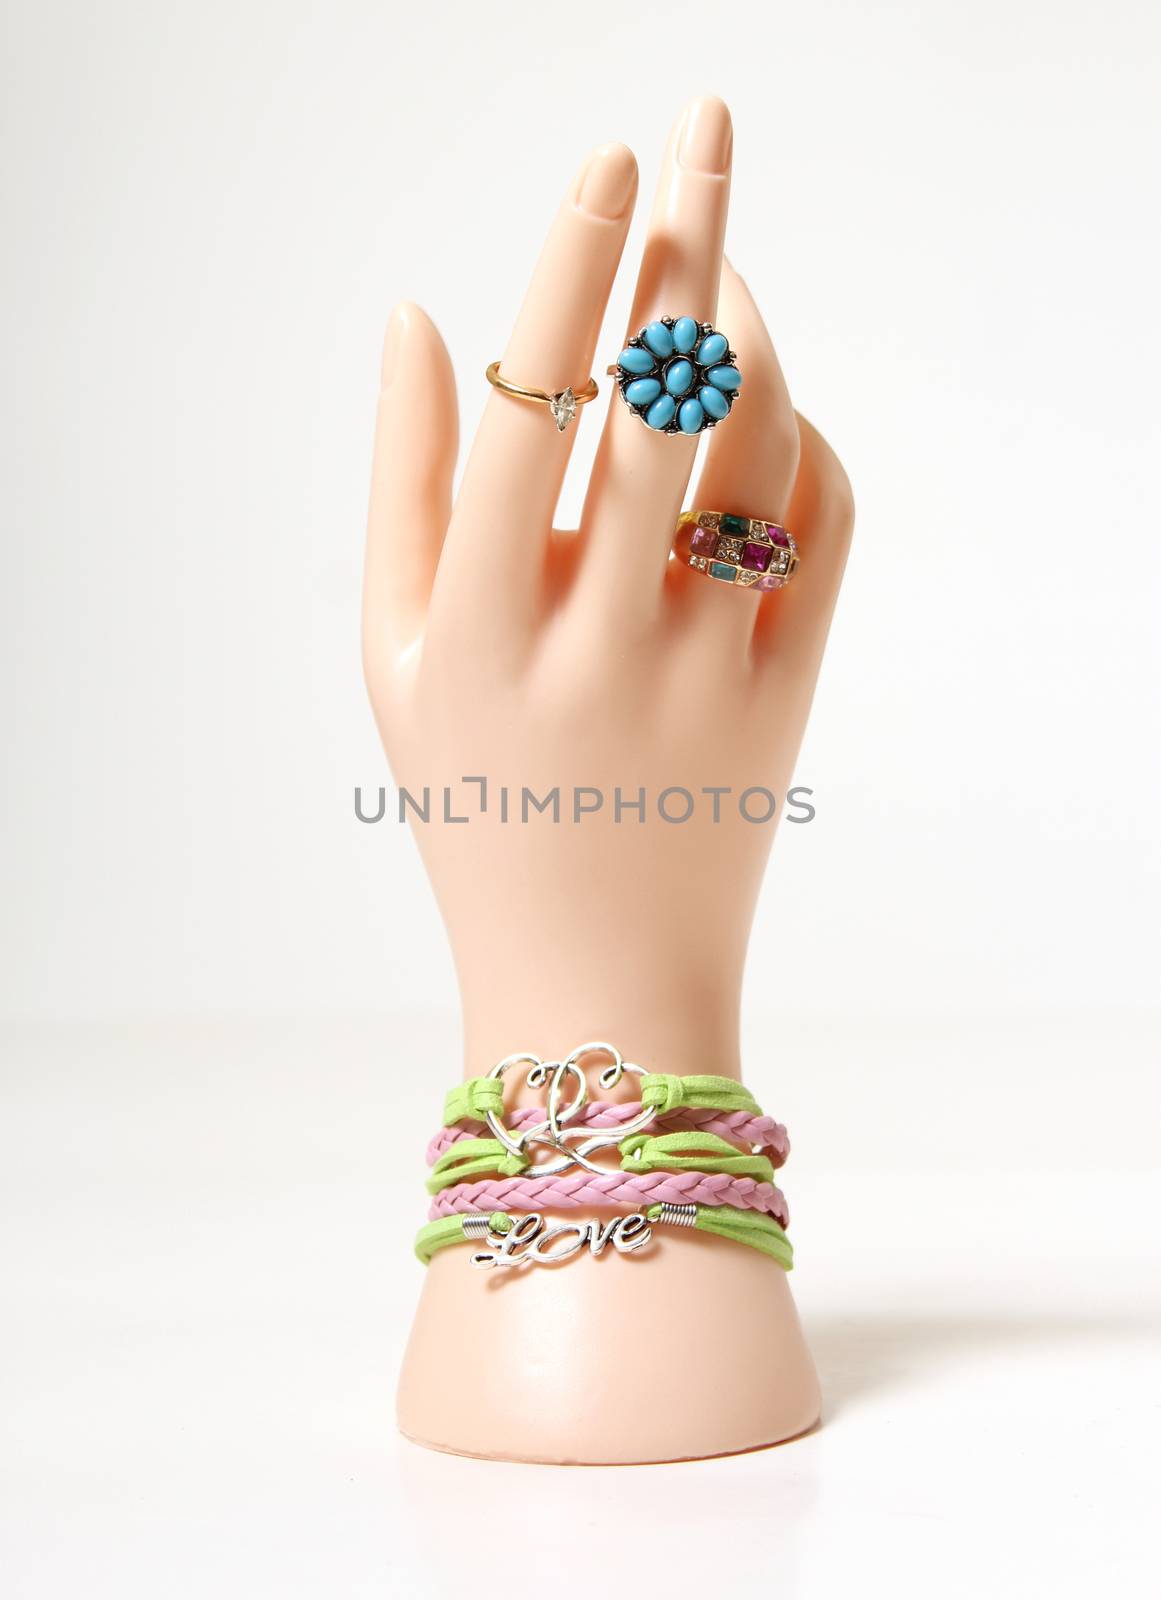 Jewelry on Mannequin, Rings and Bracelet by Marti157900